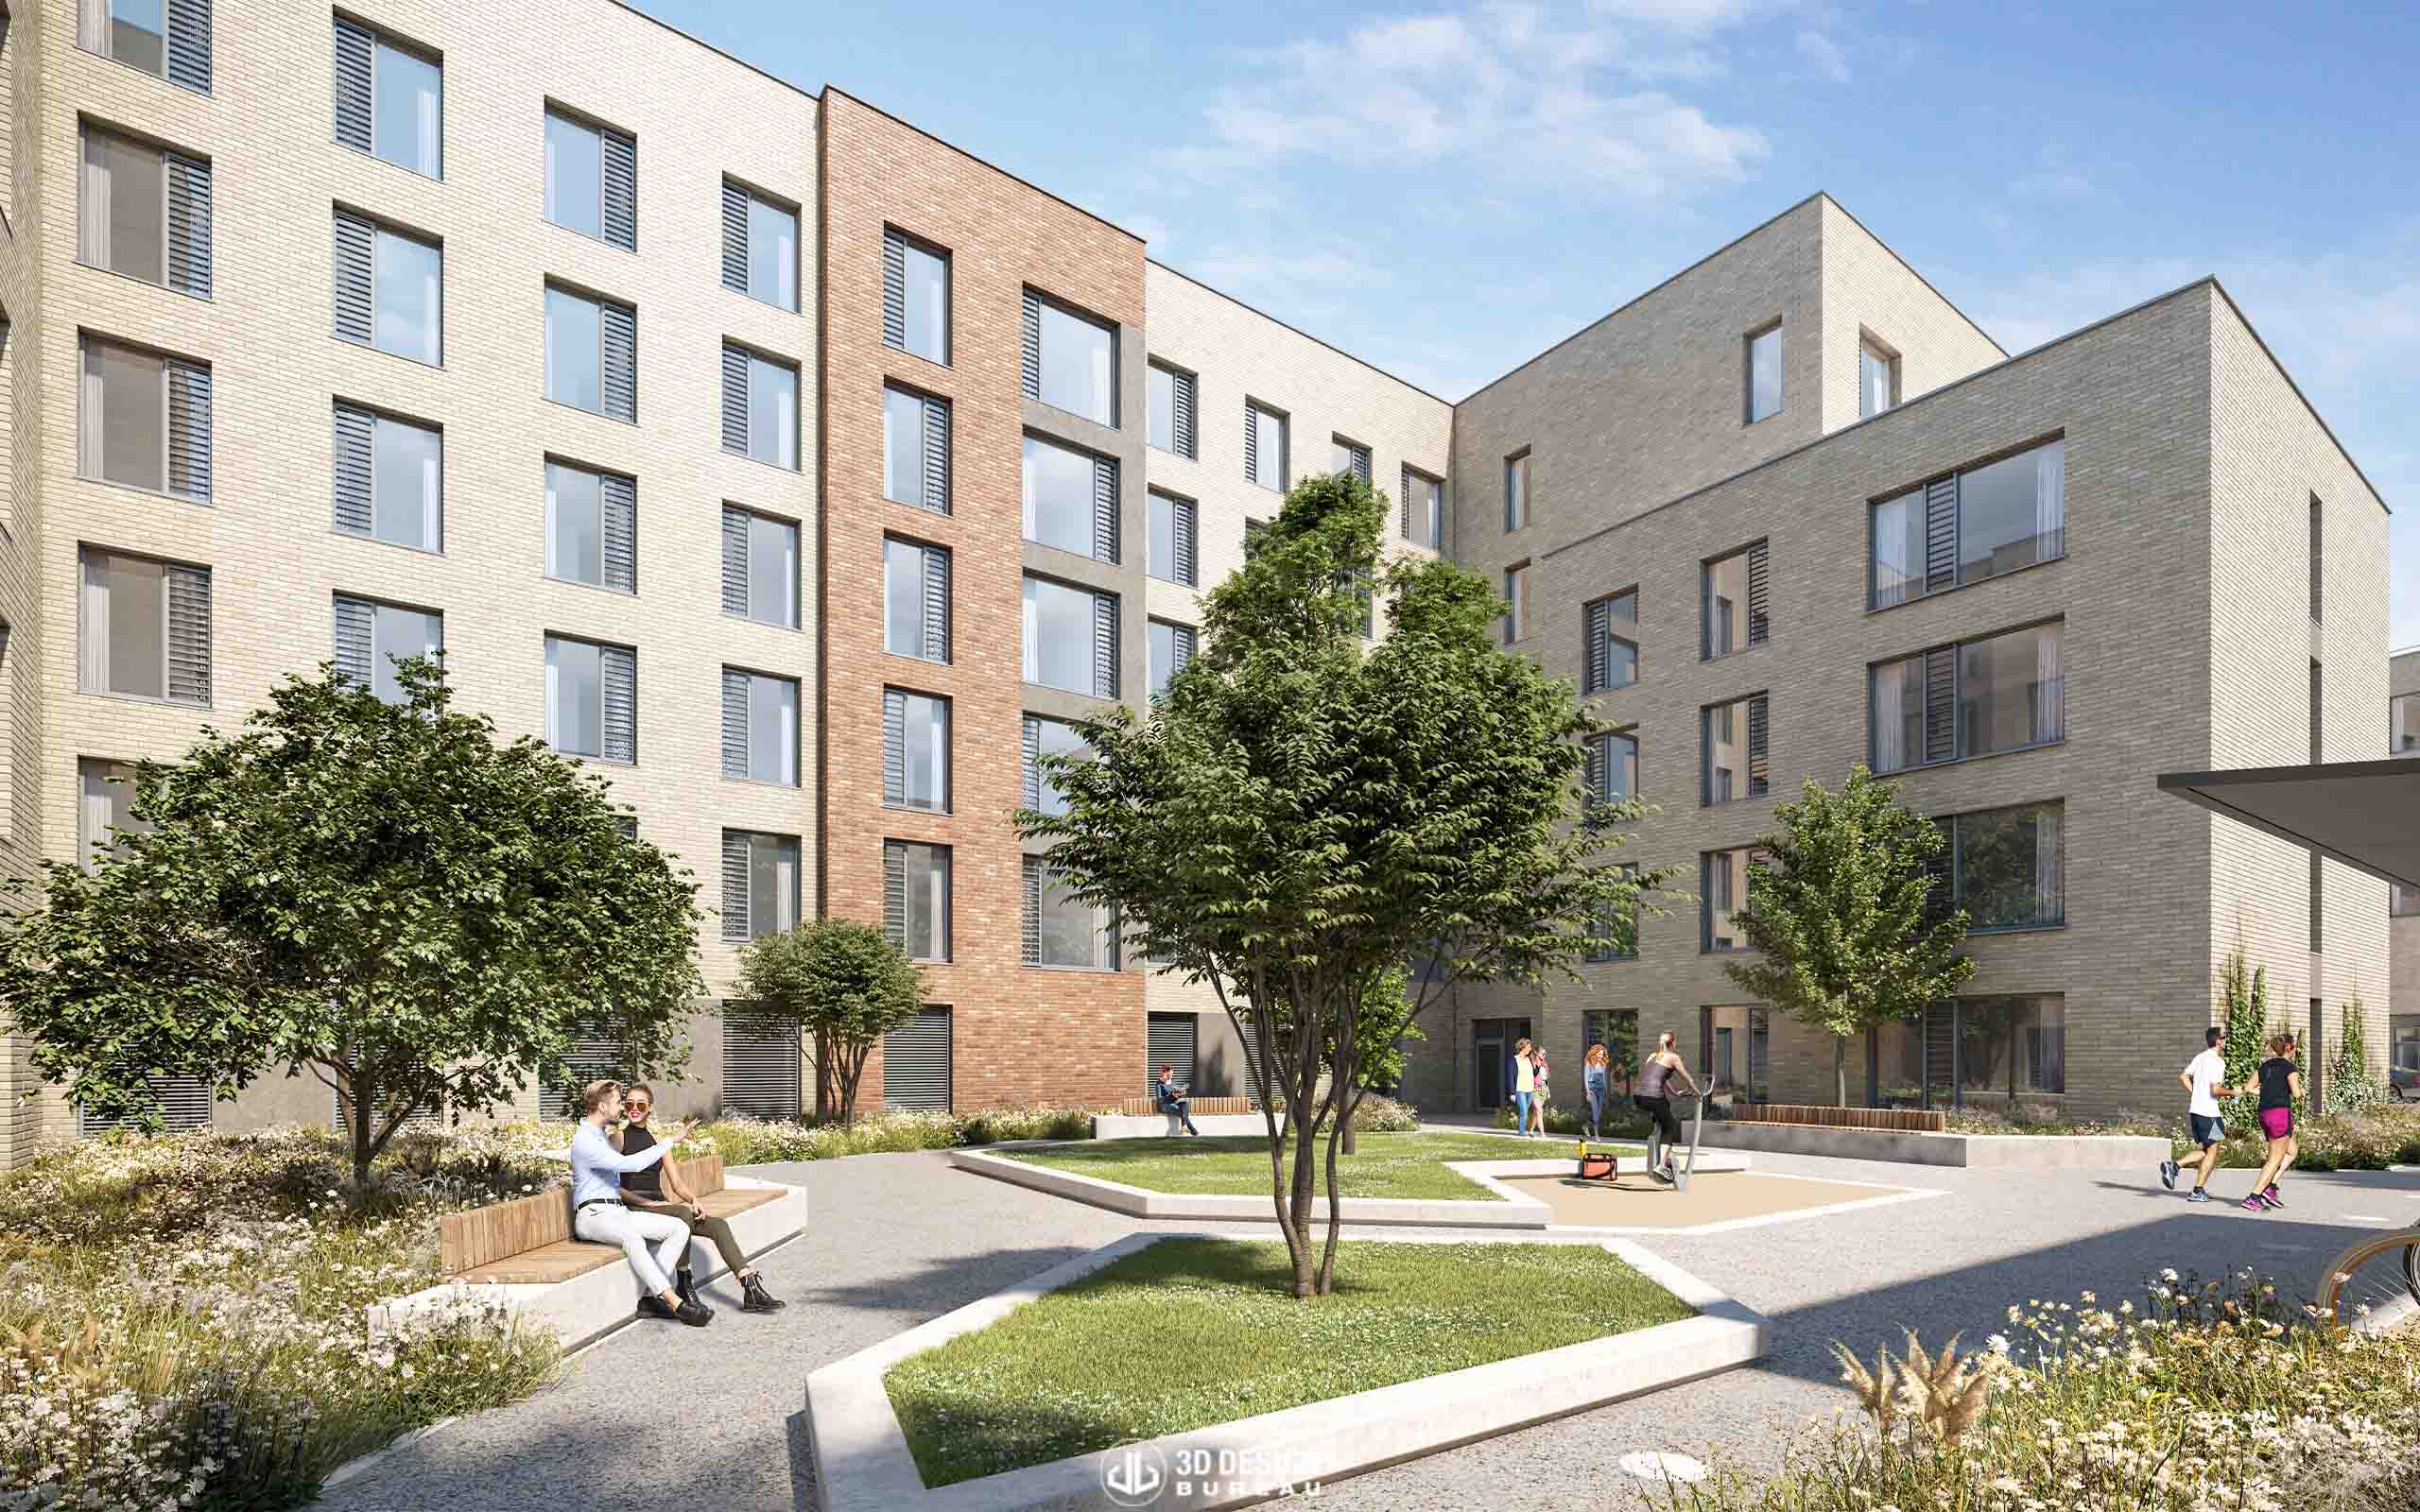 Architectural CGI of proposed Student Accomodation in Santry, Co. Dublin.